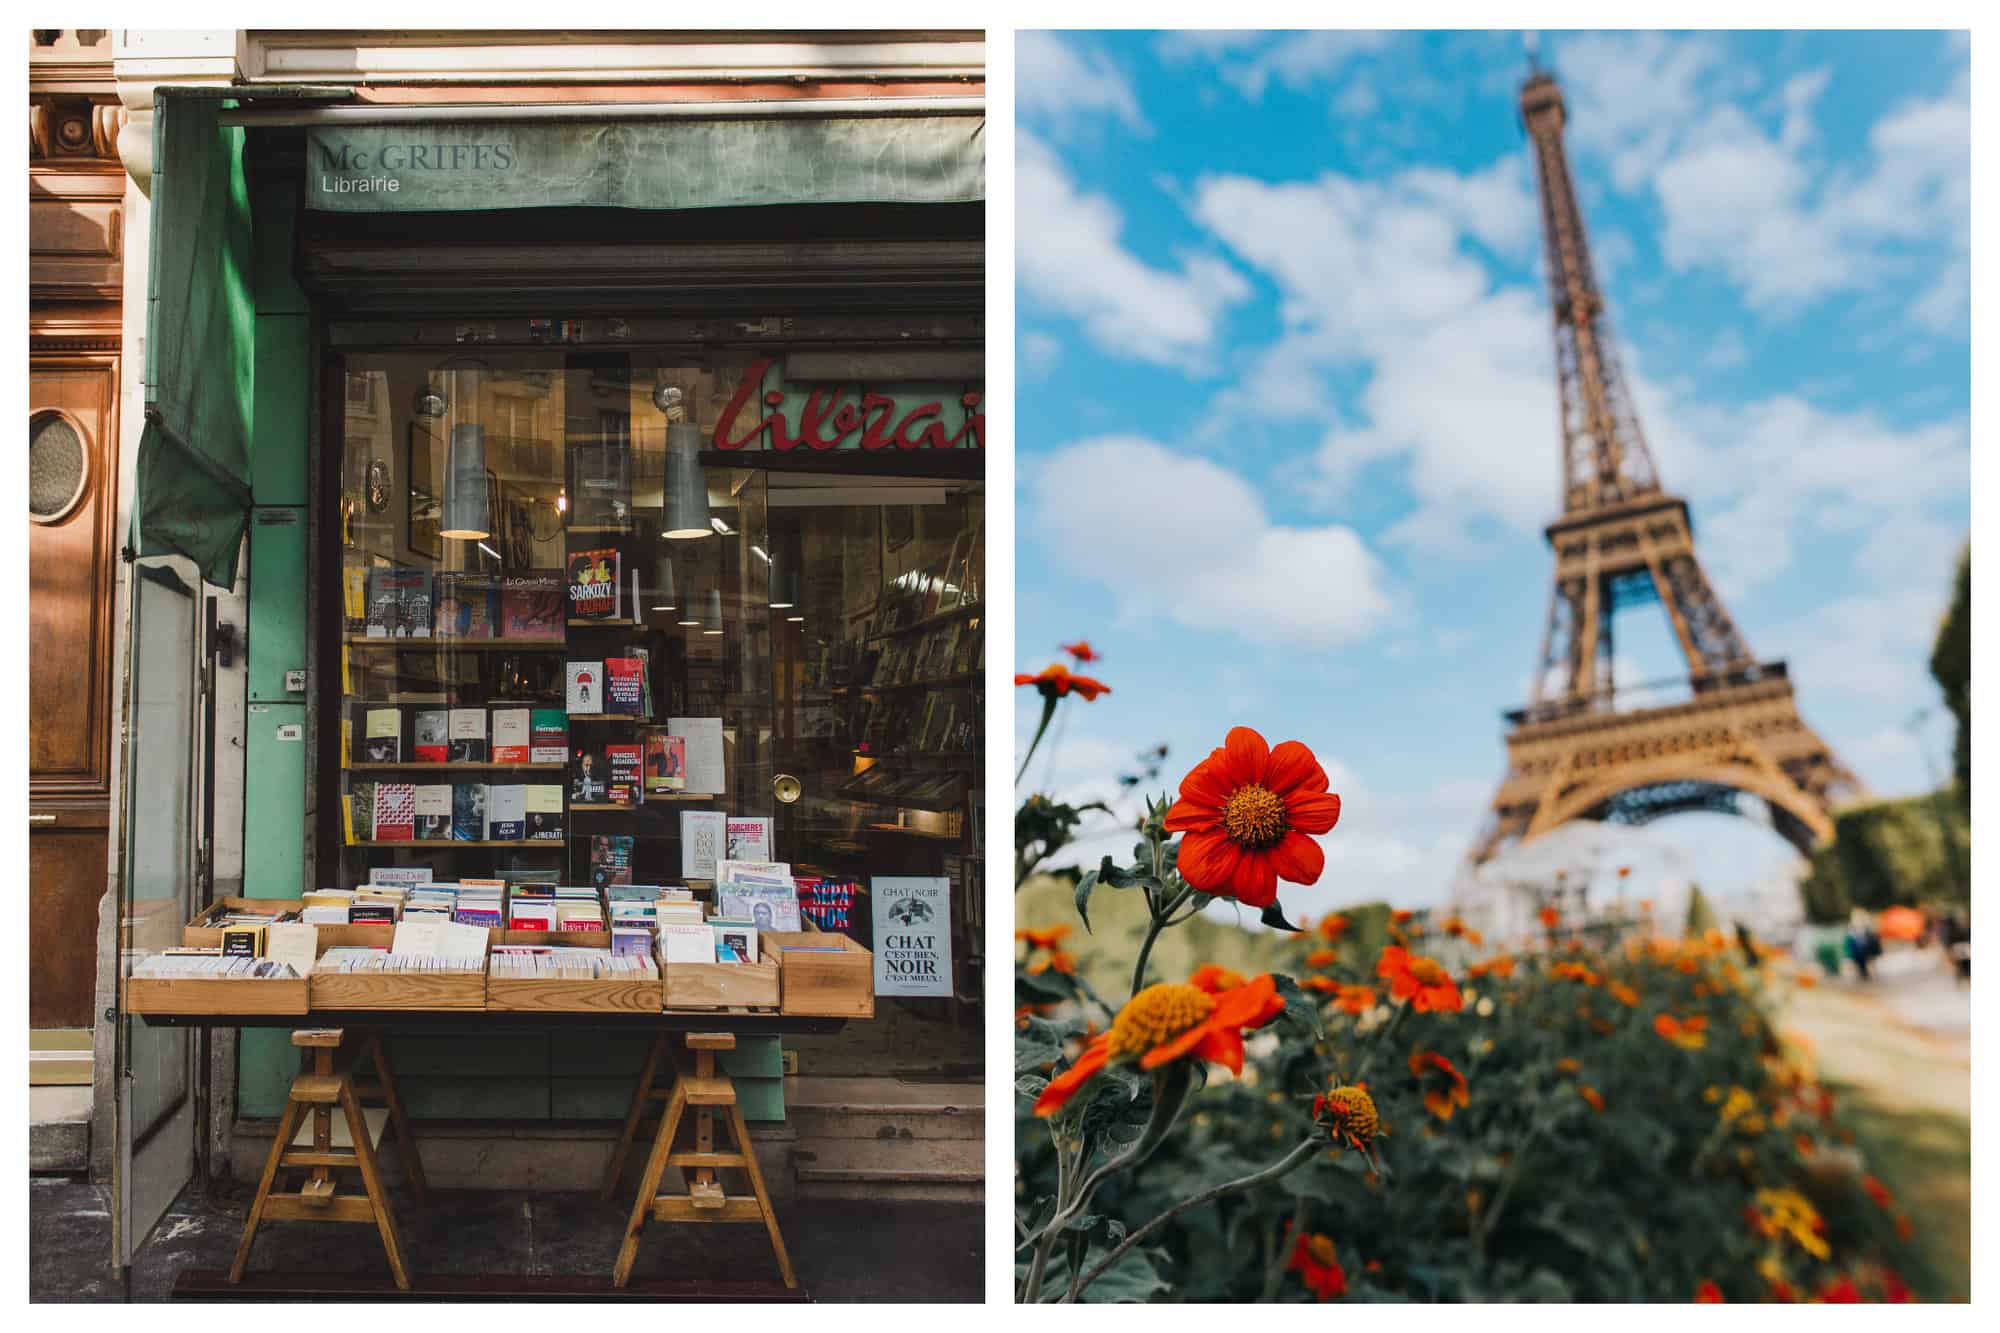 Left: the storefront of a librairie or bookshop in Montmartre. Right: a close up of red, orange, and yellow flowers with the Eiffel Tower in the background. 